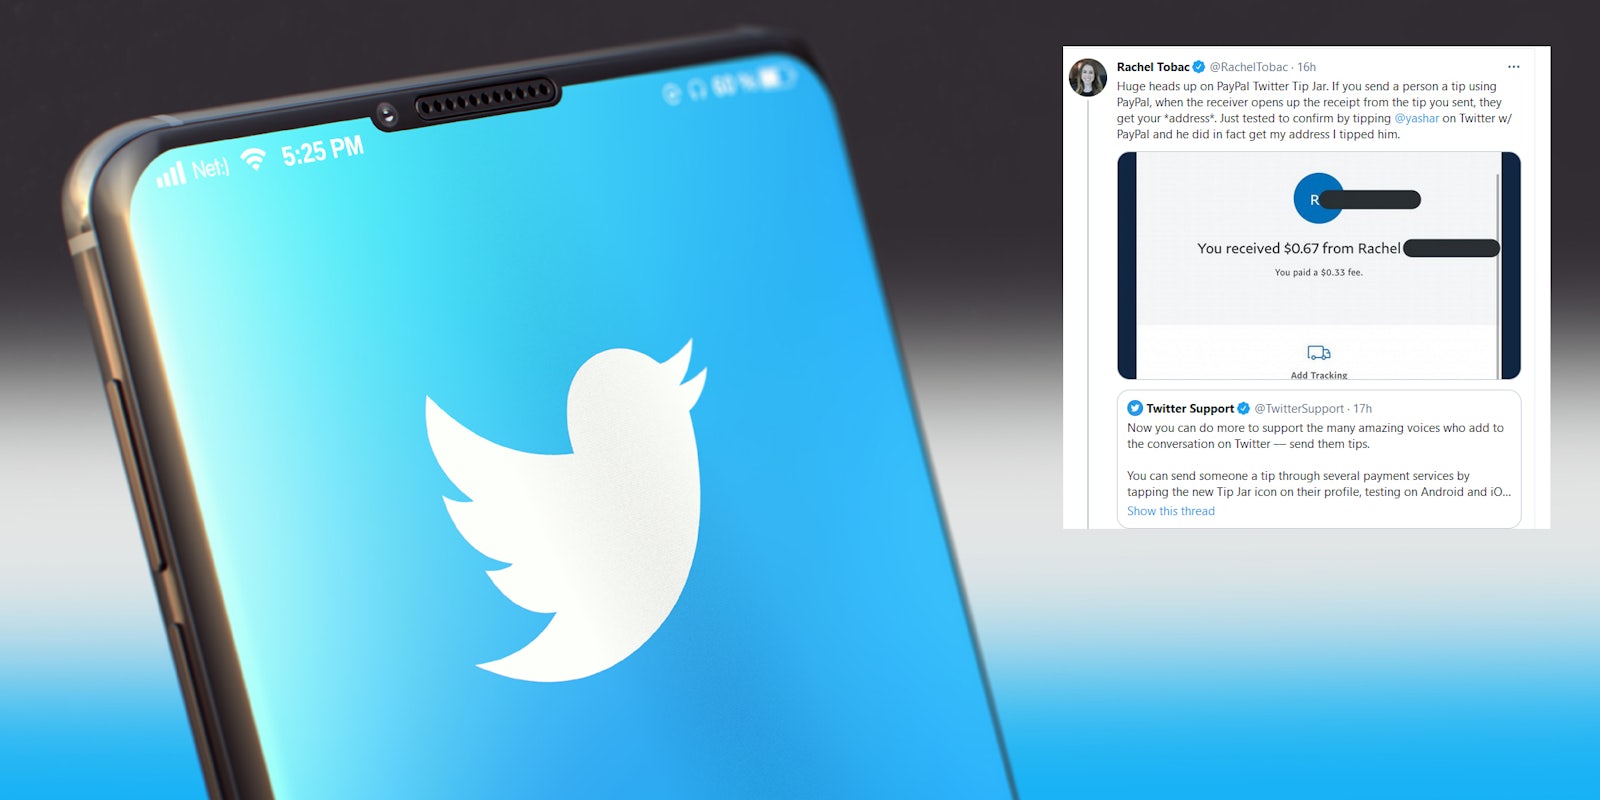 The Twitter logo on the screen of a smartphone. Next to it is a tweet from Rachel Tobac showing a privacy issue when using PayPal for Twitter's new Tip Jar function.